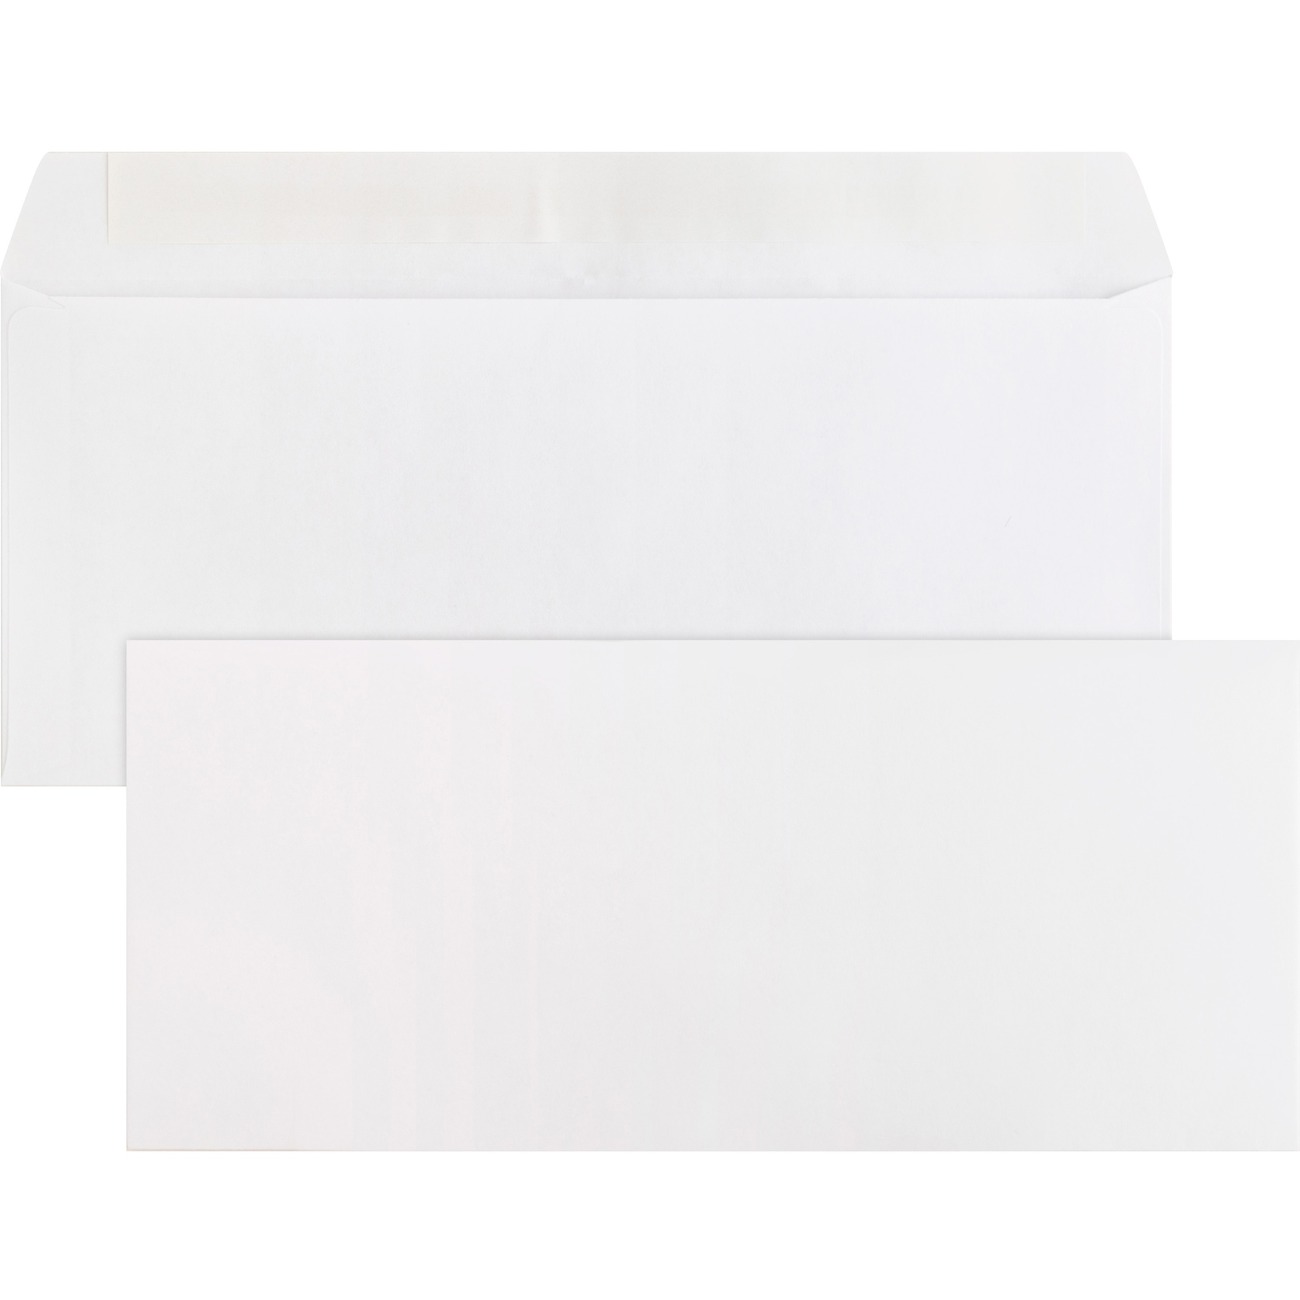 Kamloops Office Systems :: Office Supplies :: Envelopes & Forms ...